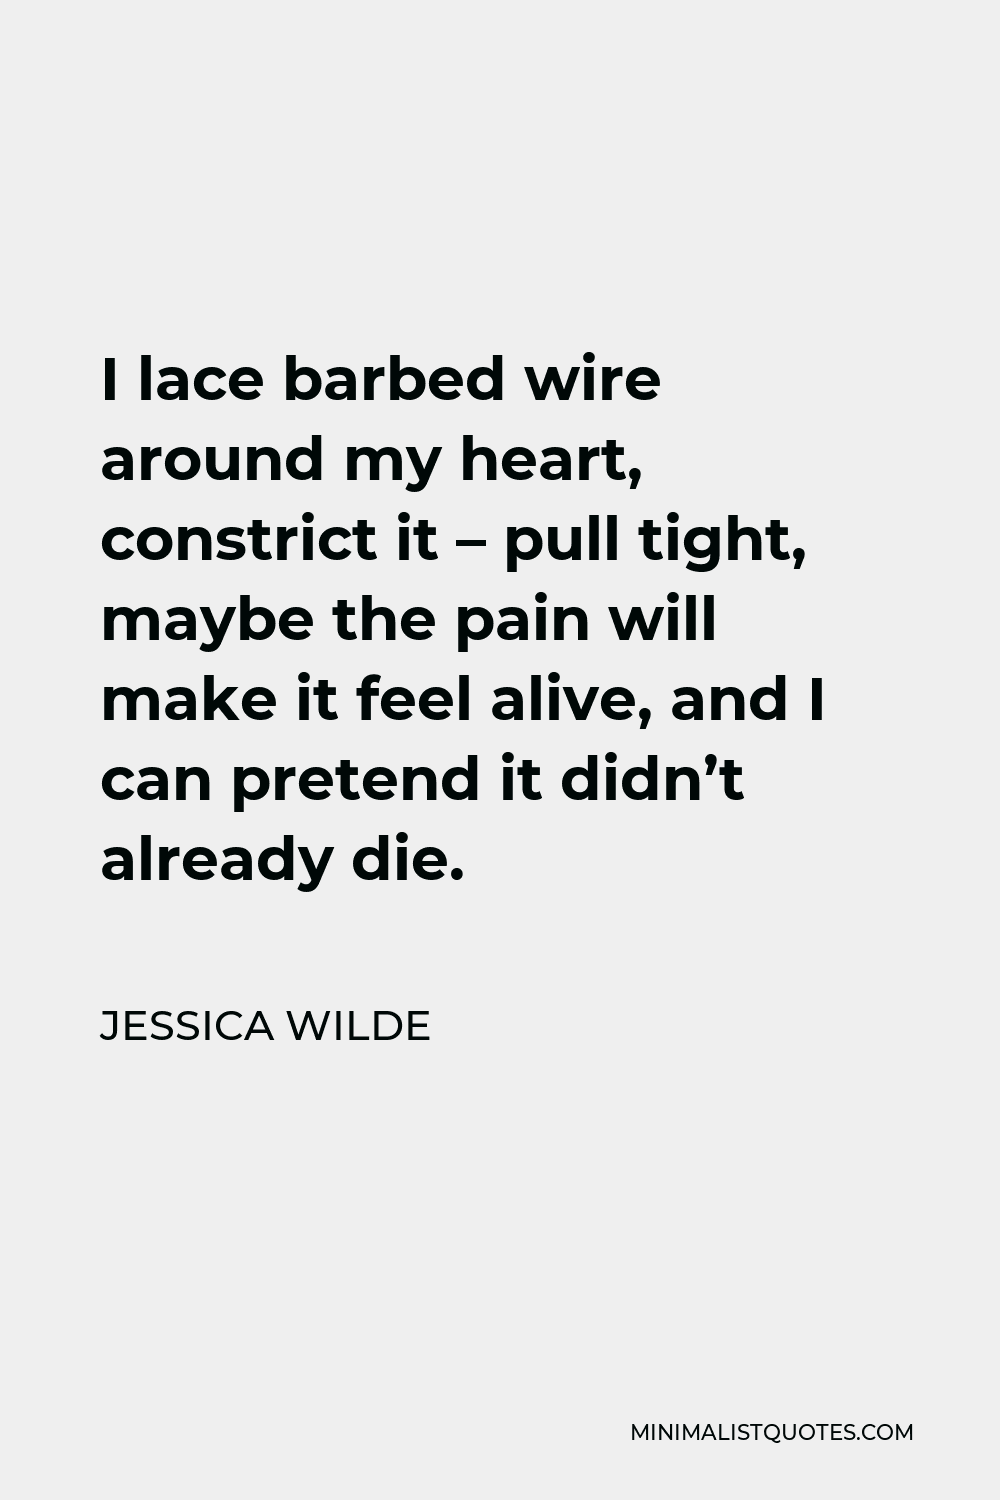 Jessica Wilde Quote - I lace barbed wire around my heart, constrict it – pull tight, maybe the pain will make it feel alive, and I can pretend it didn’t already die.